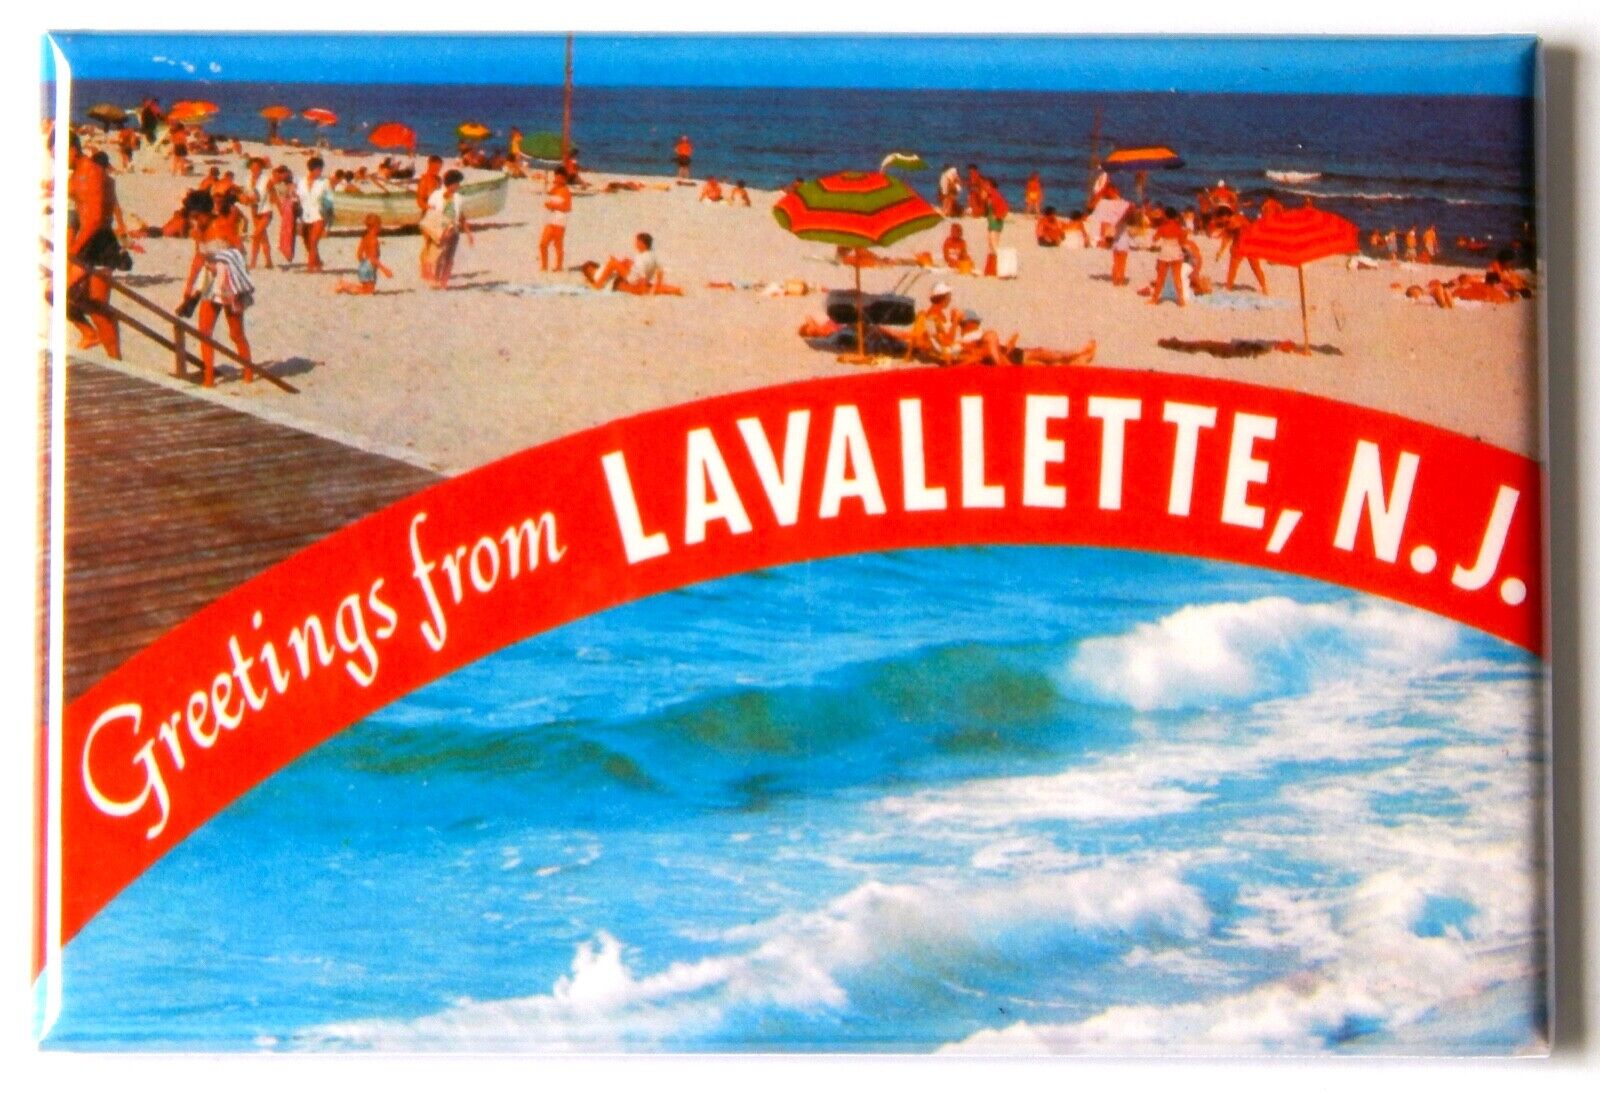 Greetings from Lavallette New Jersey FRIDGE MAGNET travel souven